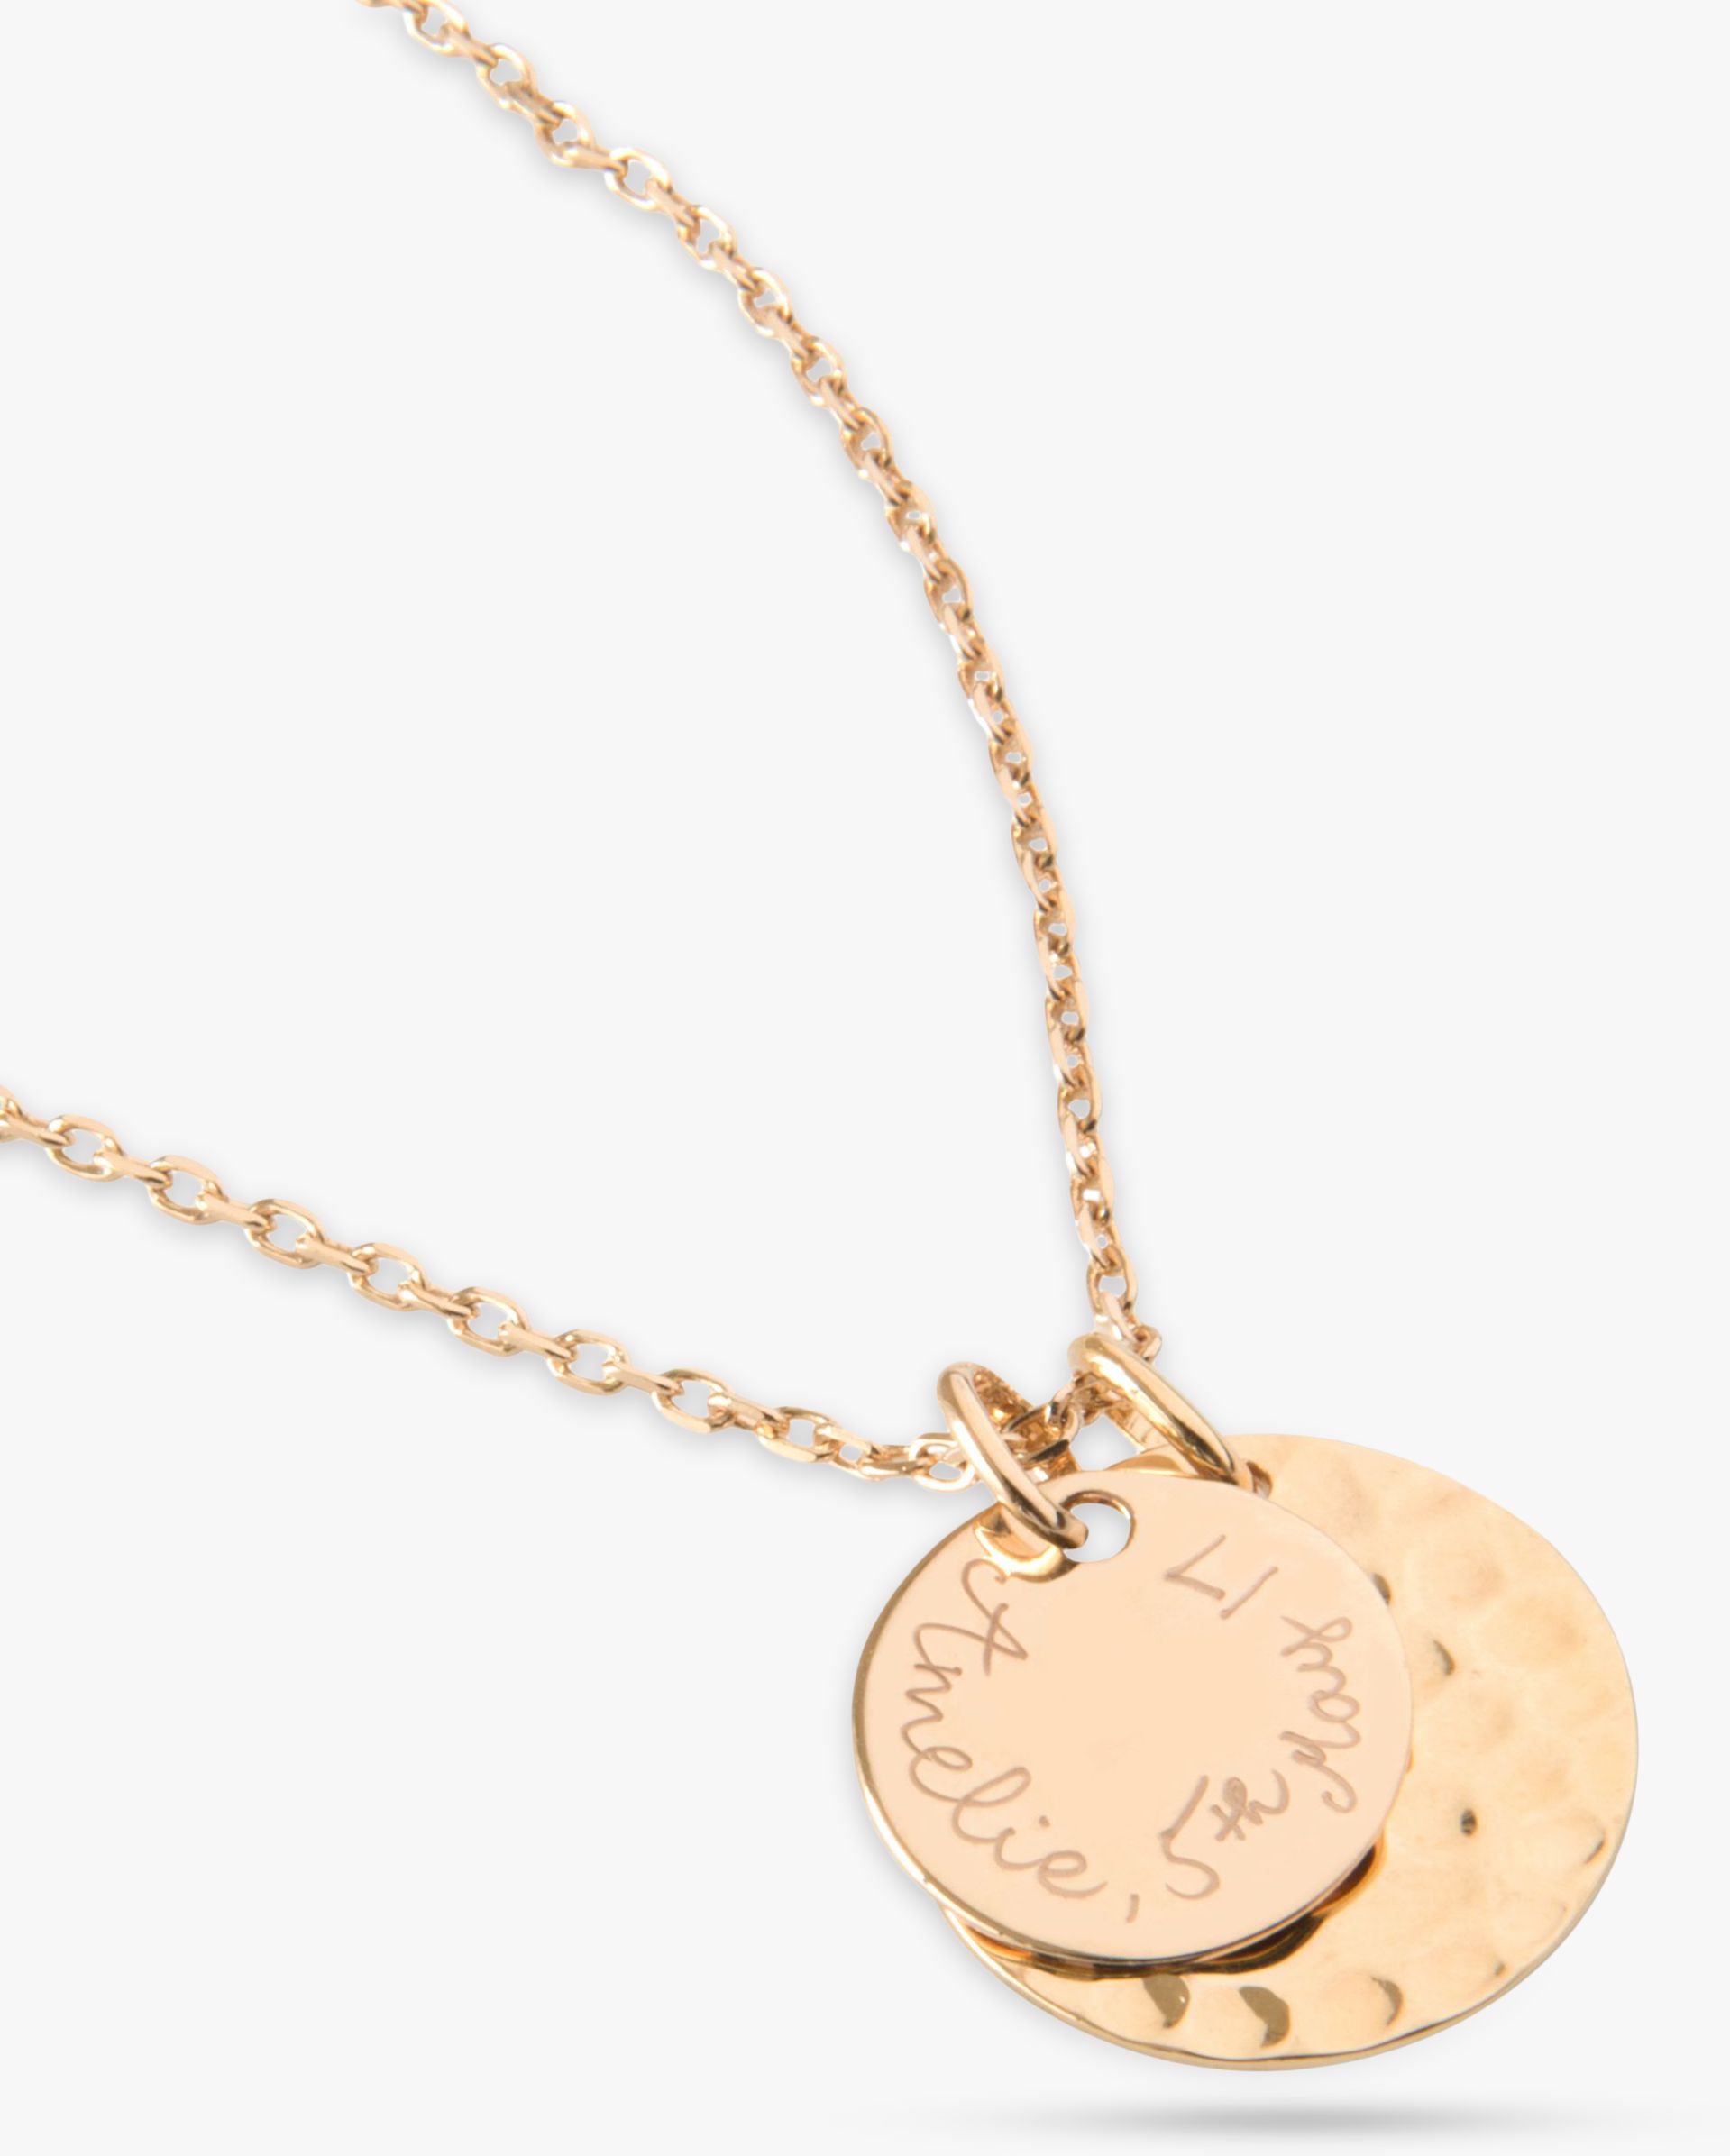 Merci Maman Personalised Double Hammered and Polished Disc Pendant Necklace, Gold